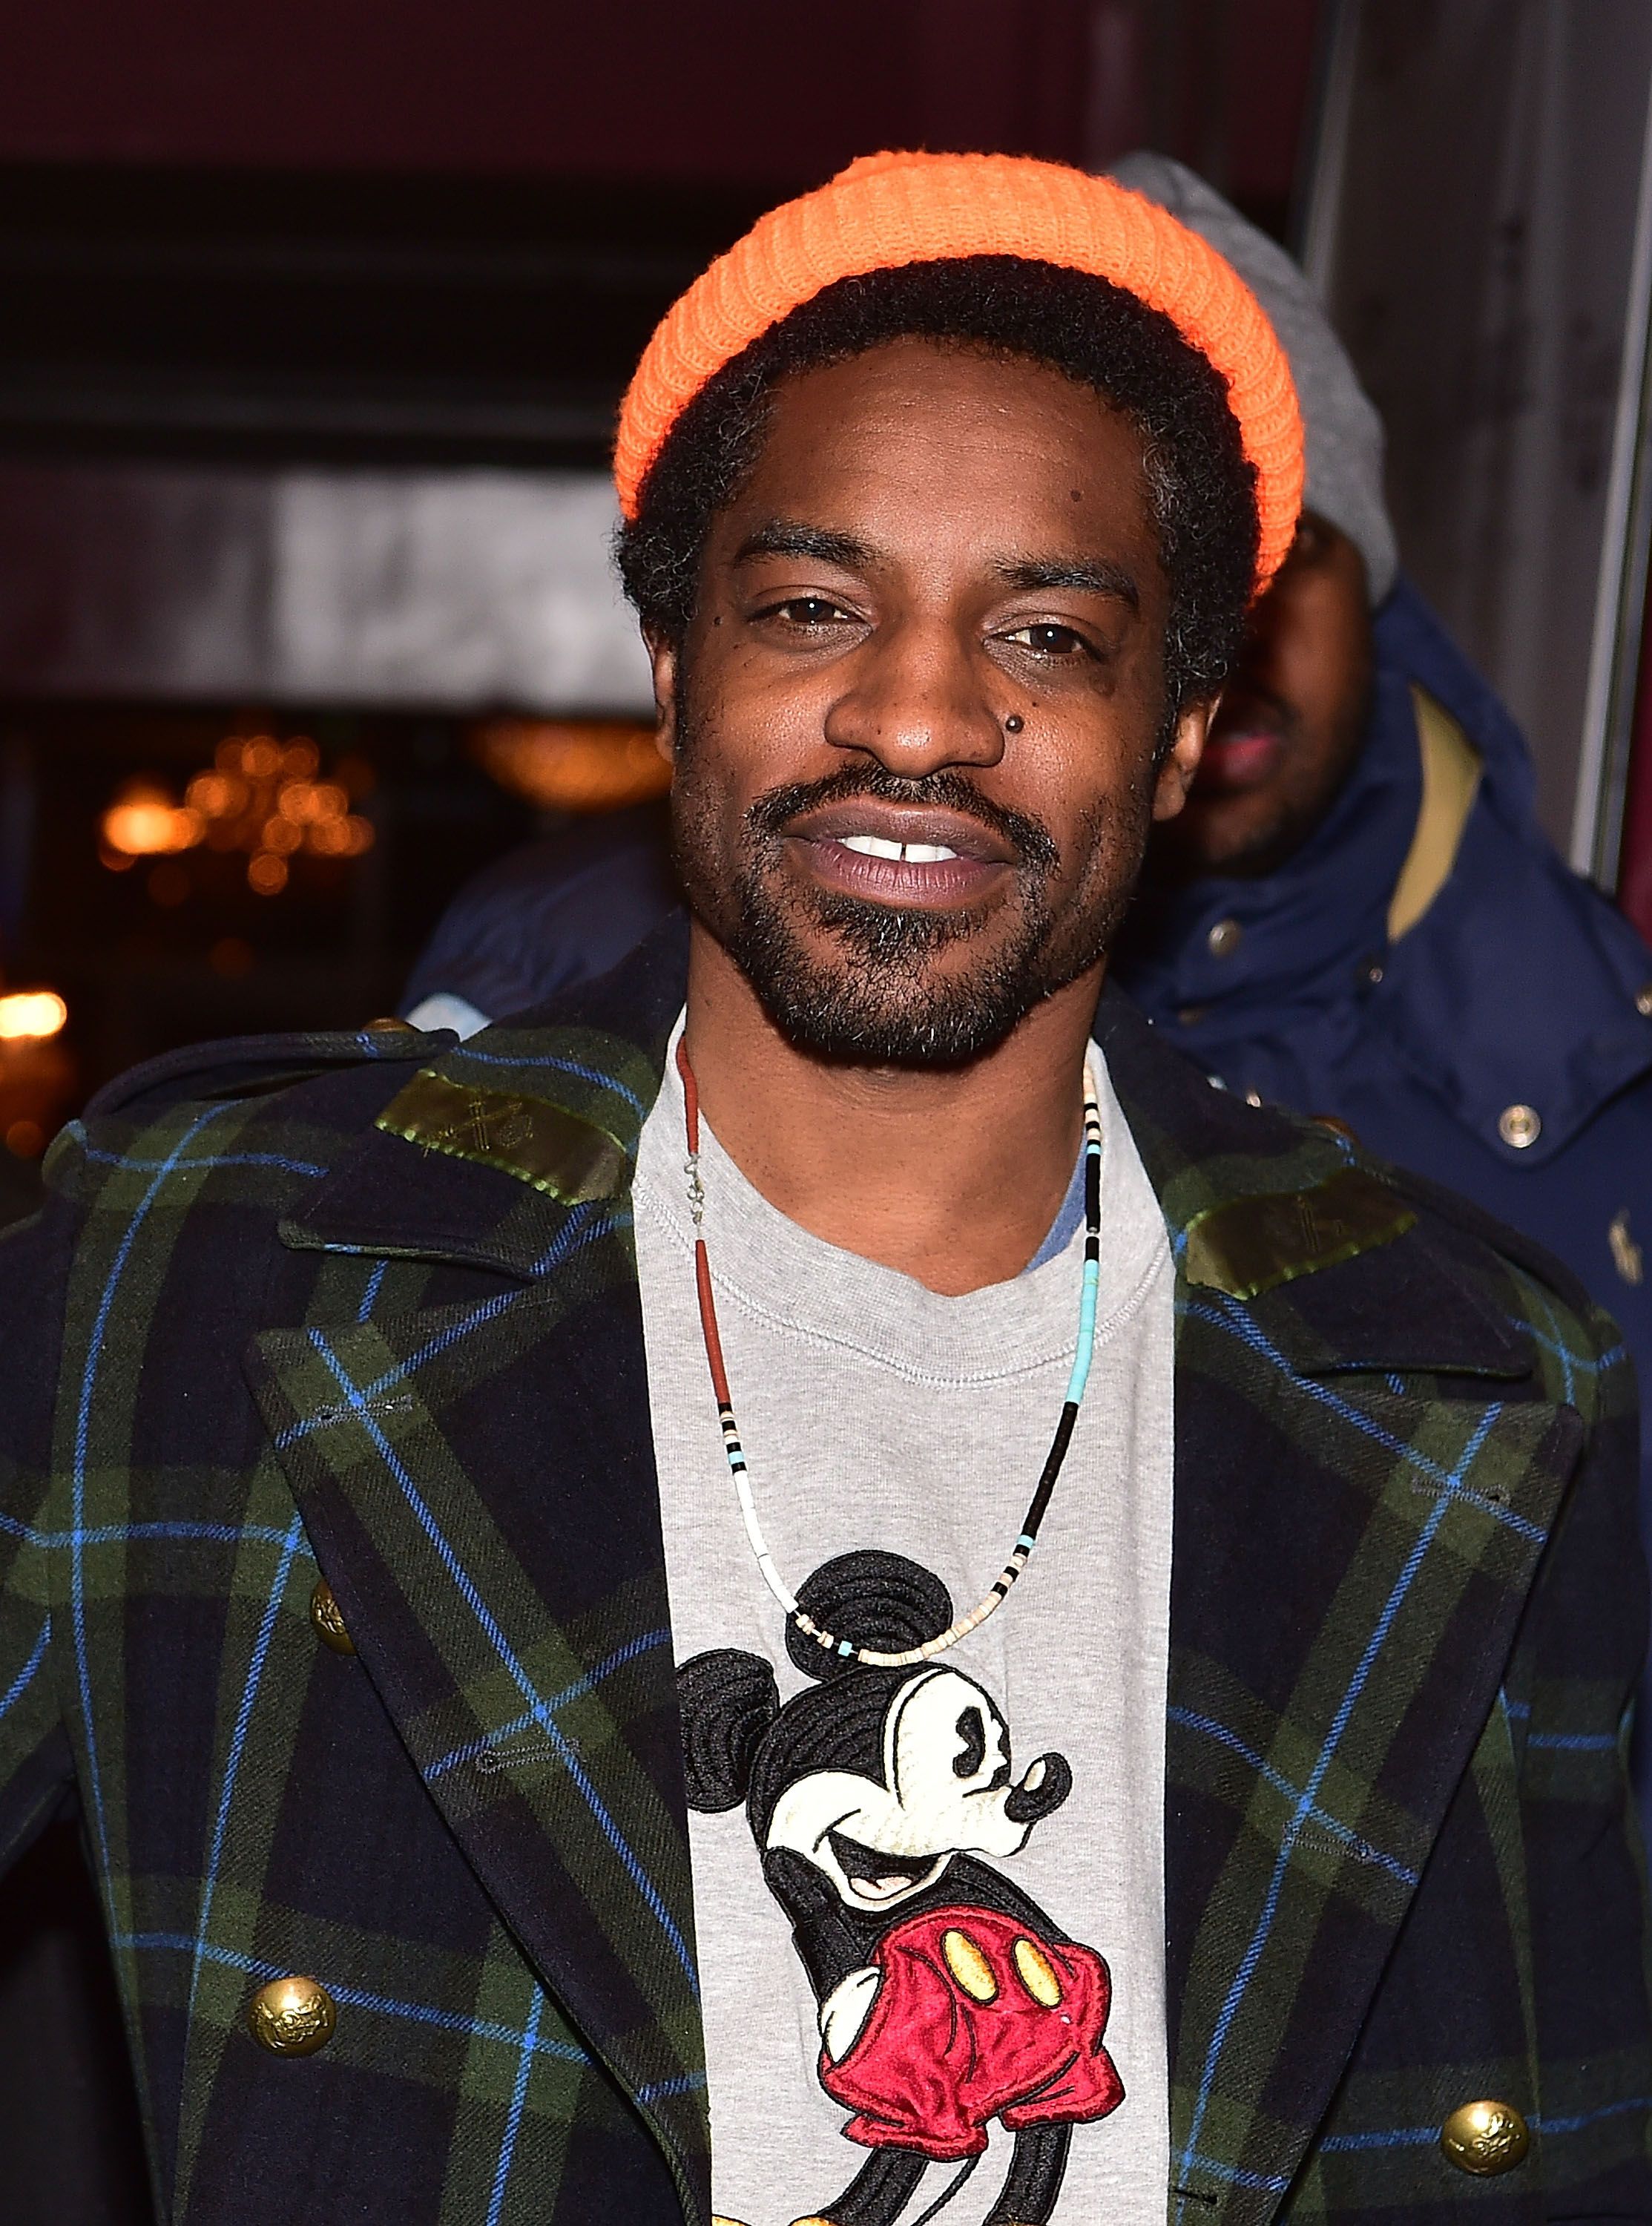 Rapper Andre 3000 at the celebration of Kawan KP Prather's Grammy nomination in February  2016. | Photo: Getty Images